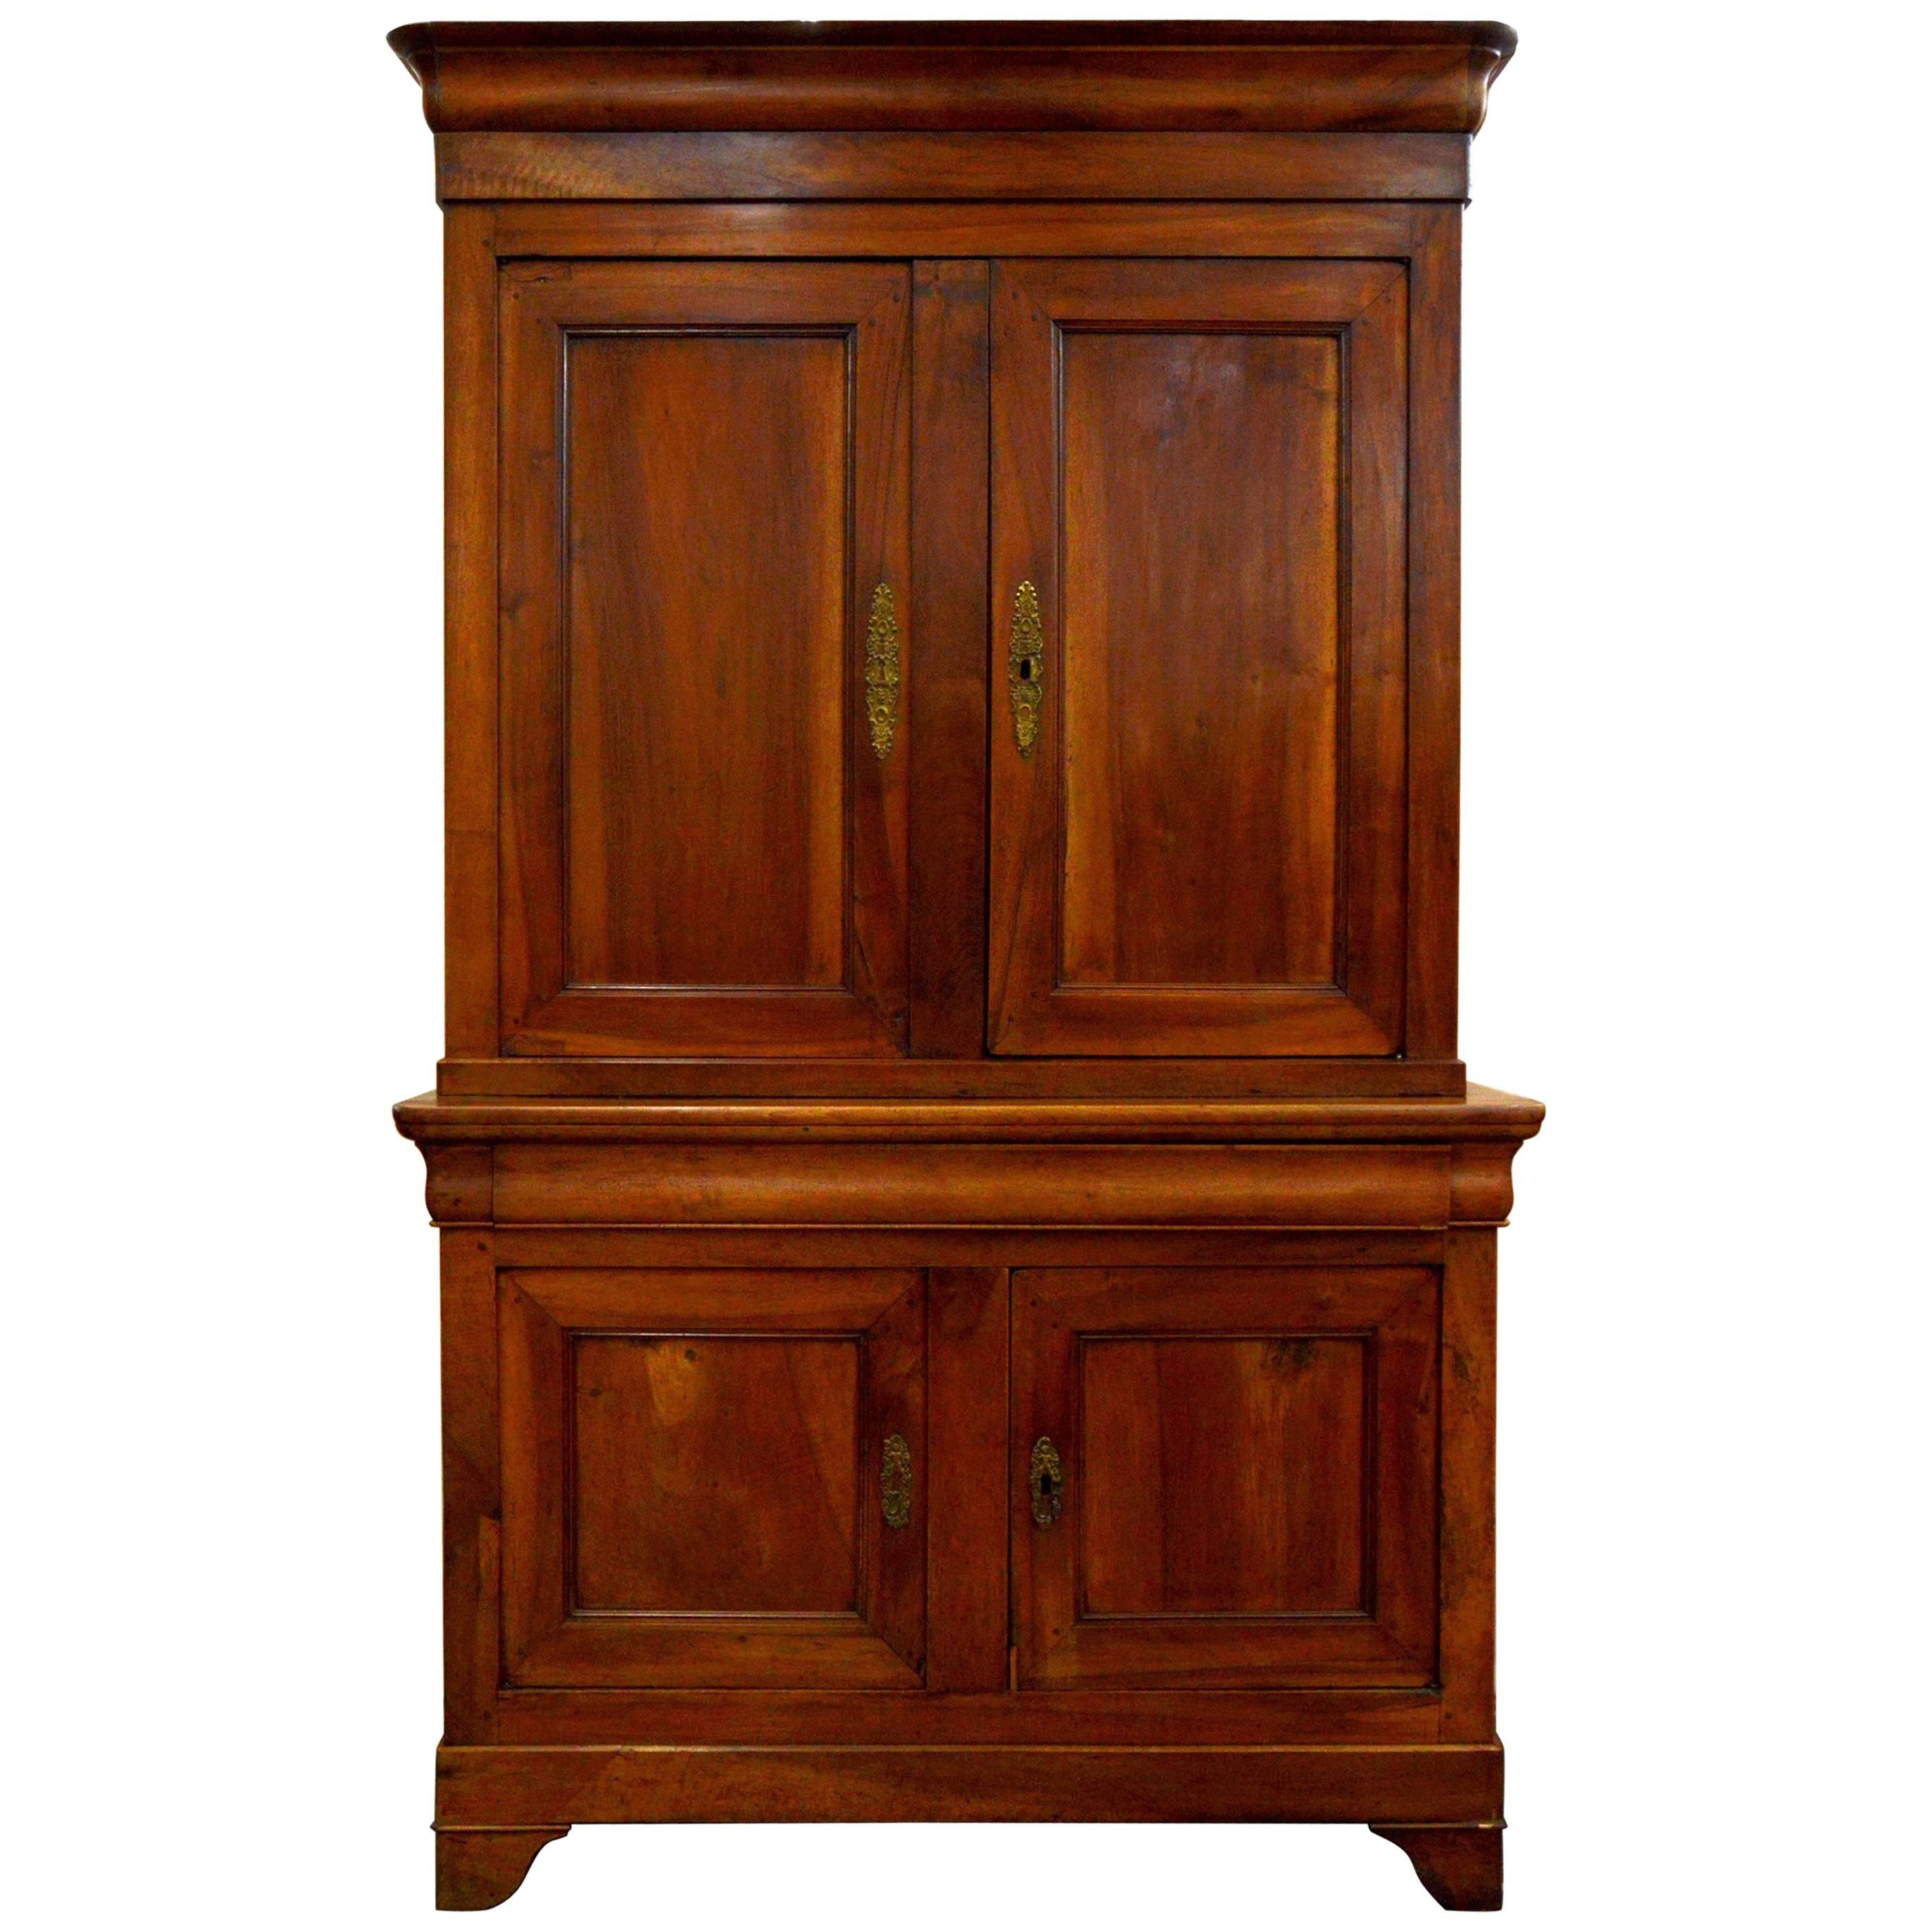 Louis-Philippe Period French Cabinet "Deux-Corps"